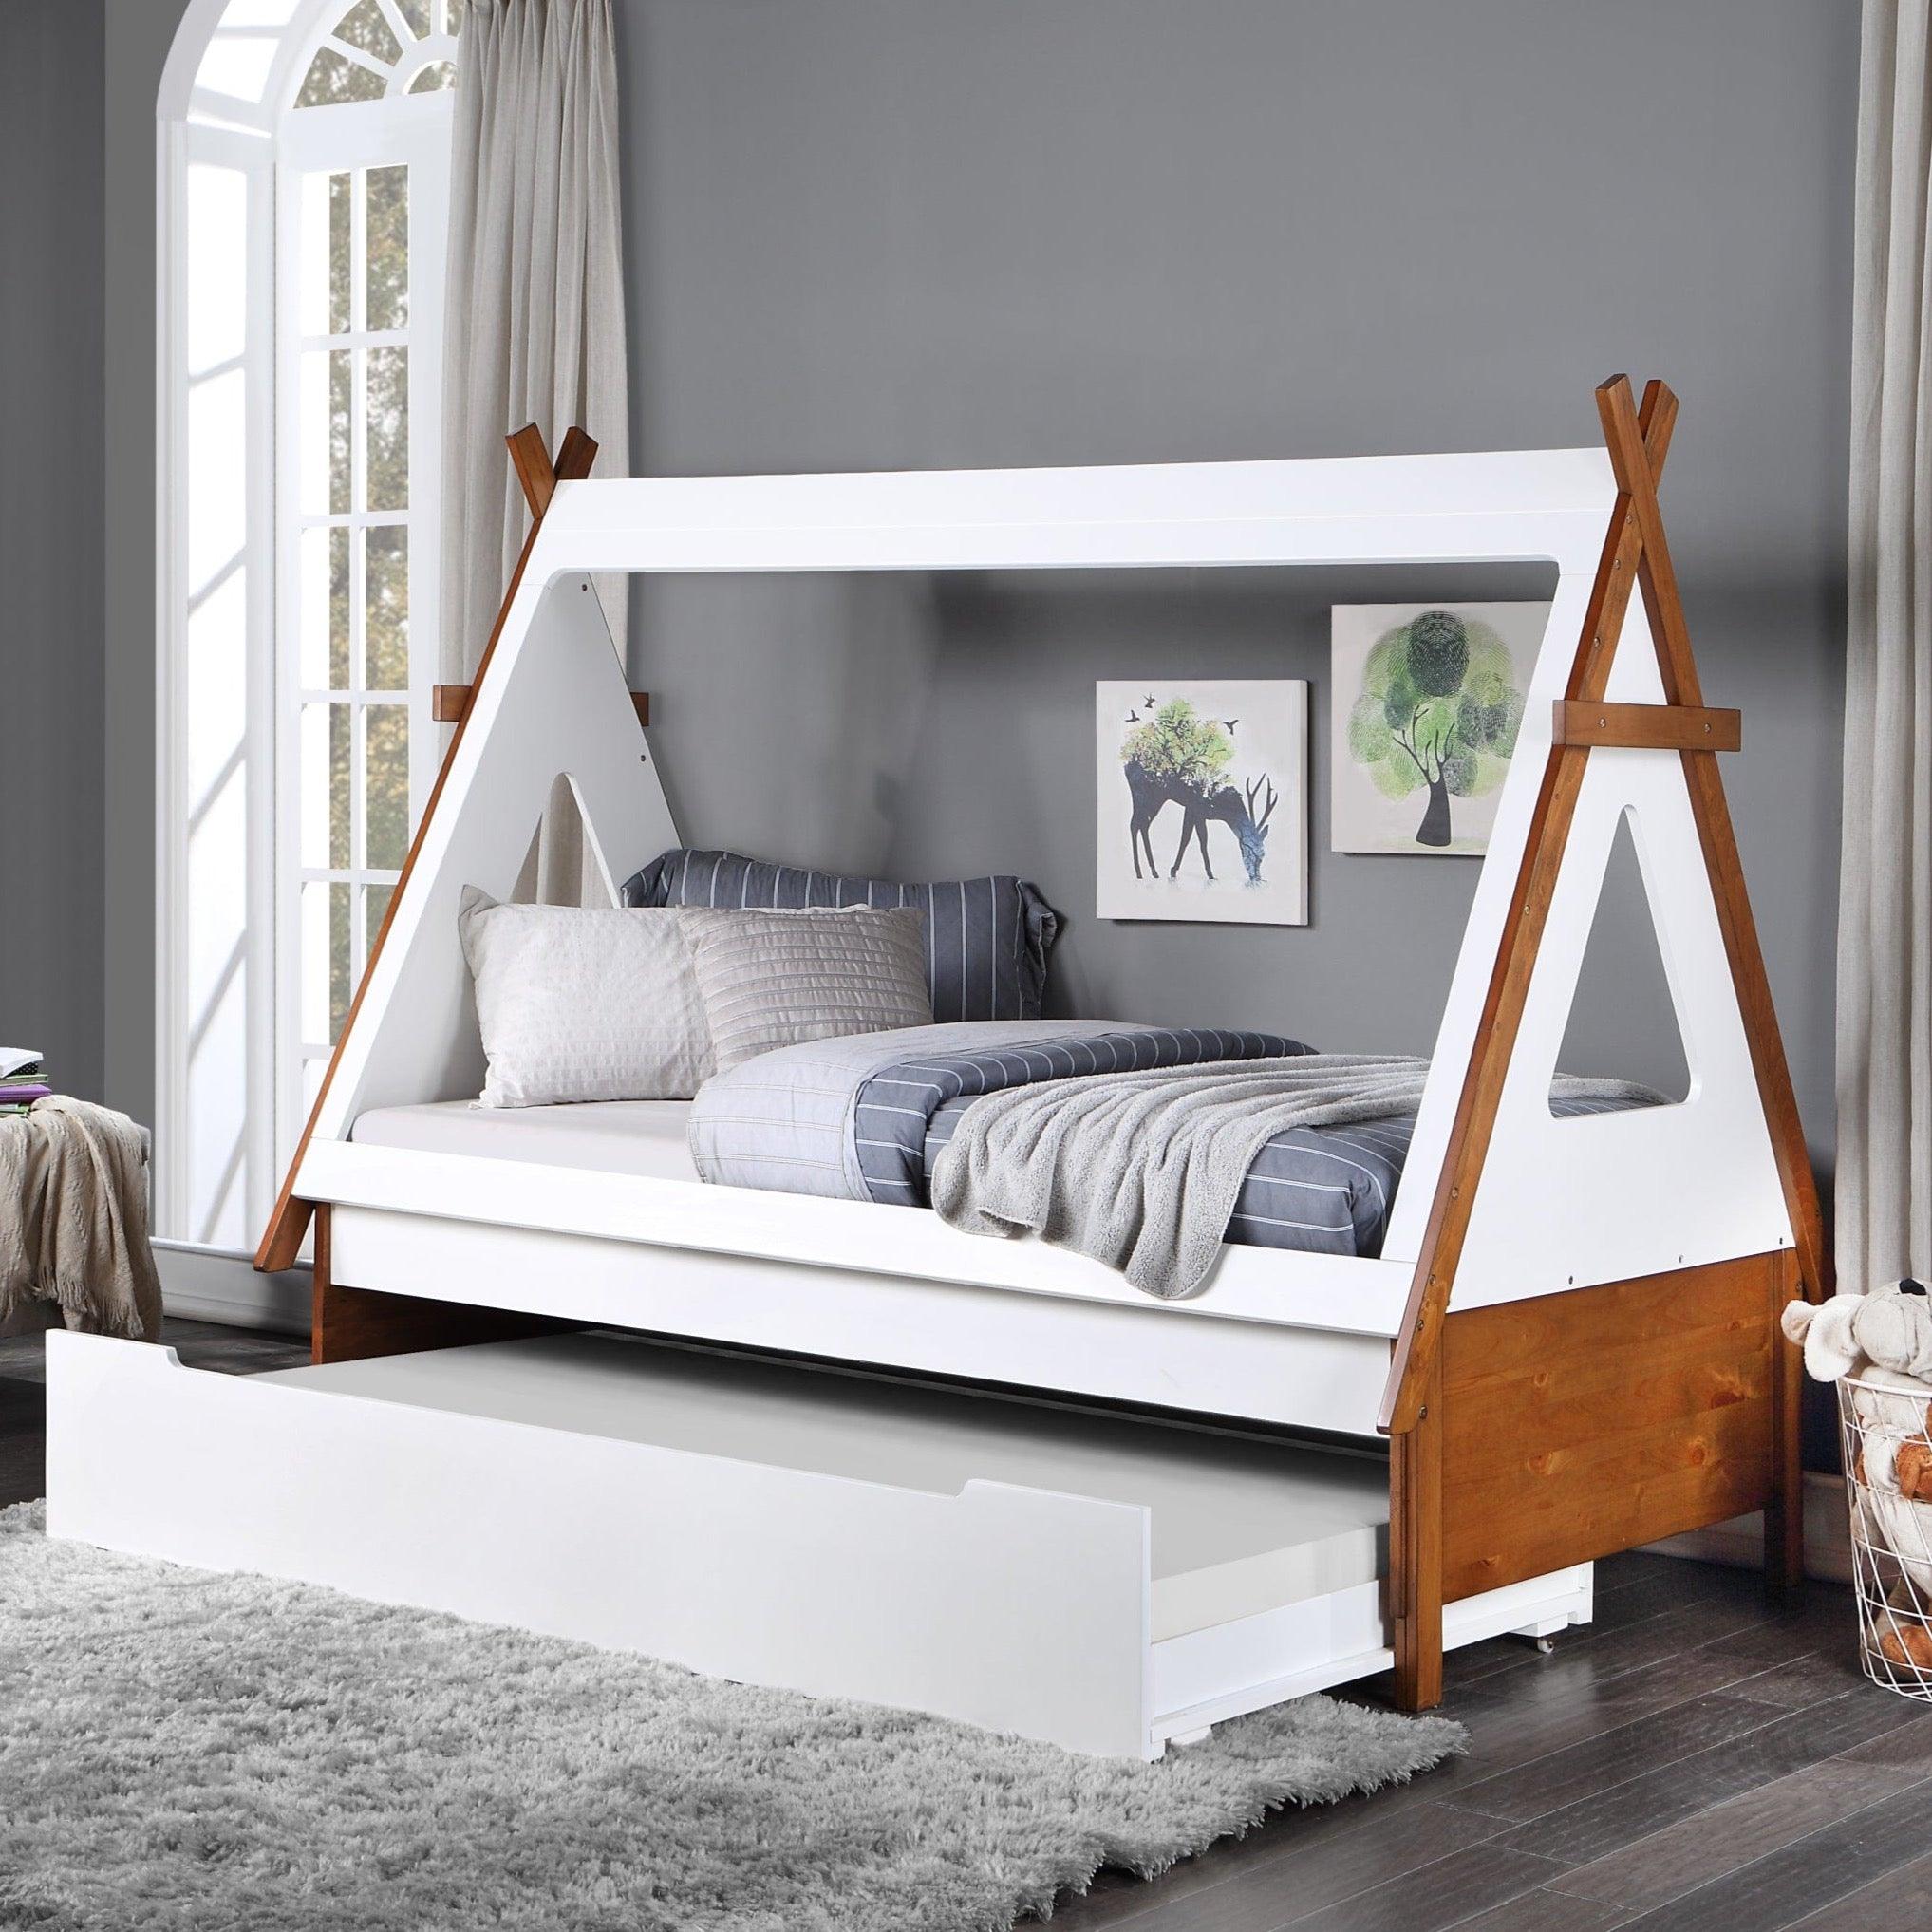 Shop Asme Bed - Twin Mademoiselle Home Decor